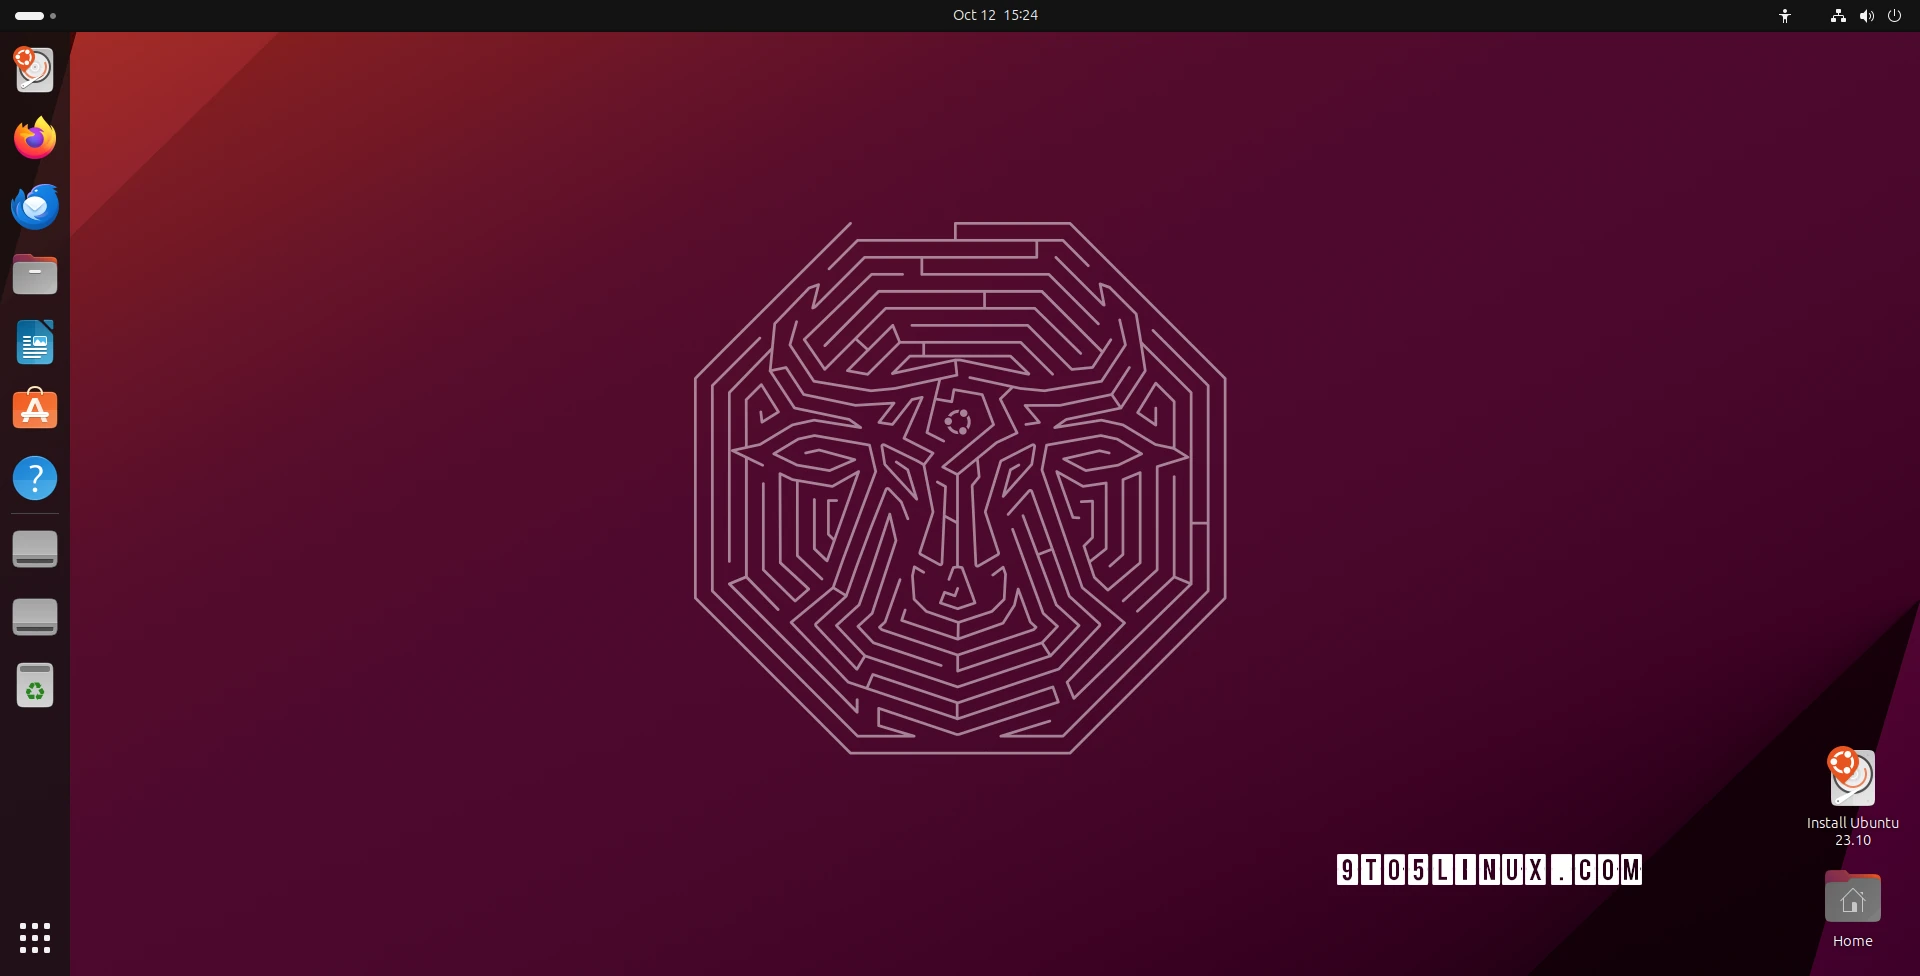 Ubuntu 23.10 (Mantic Minotaur) Officially Released with Linux 6.5 and GNOME 45